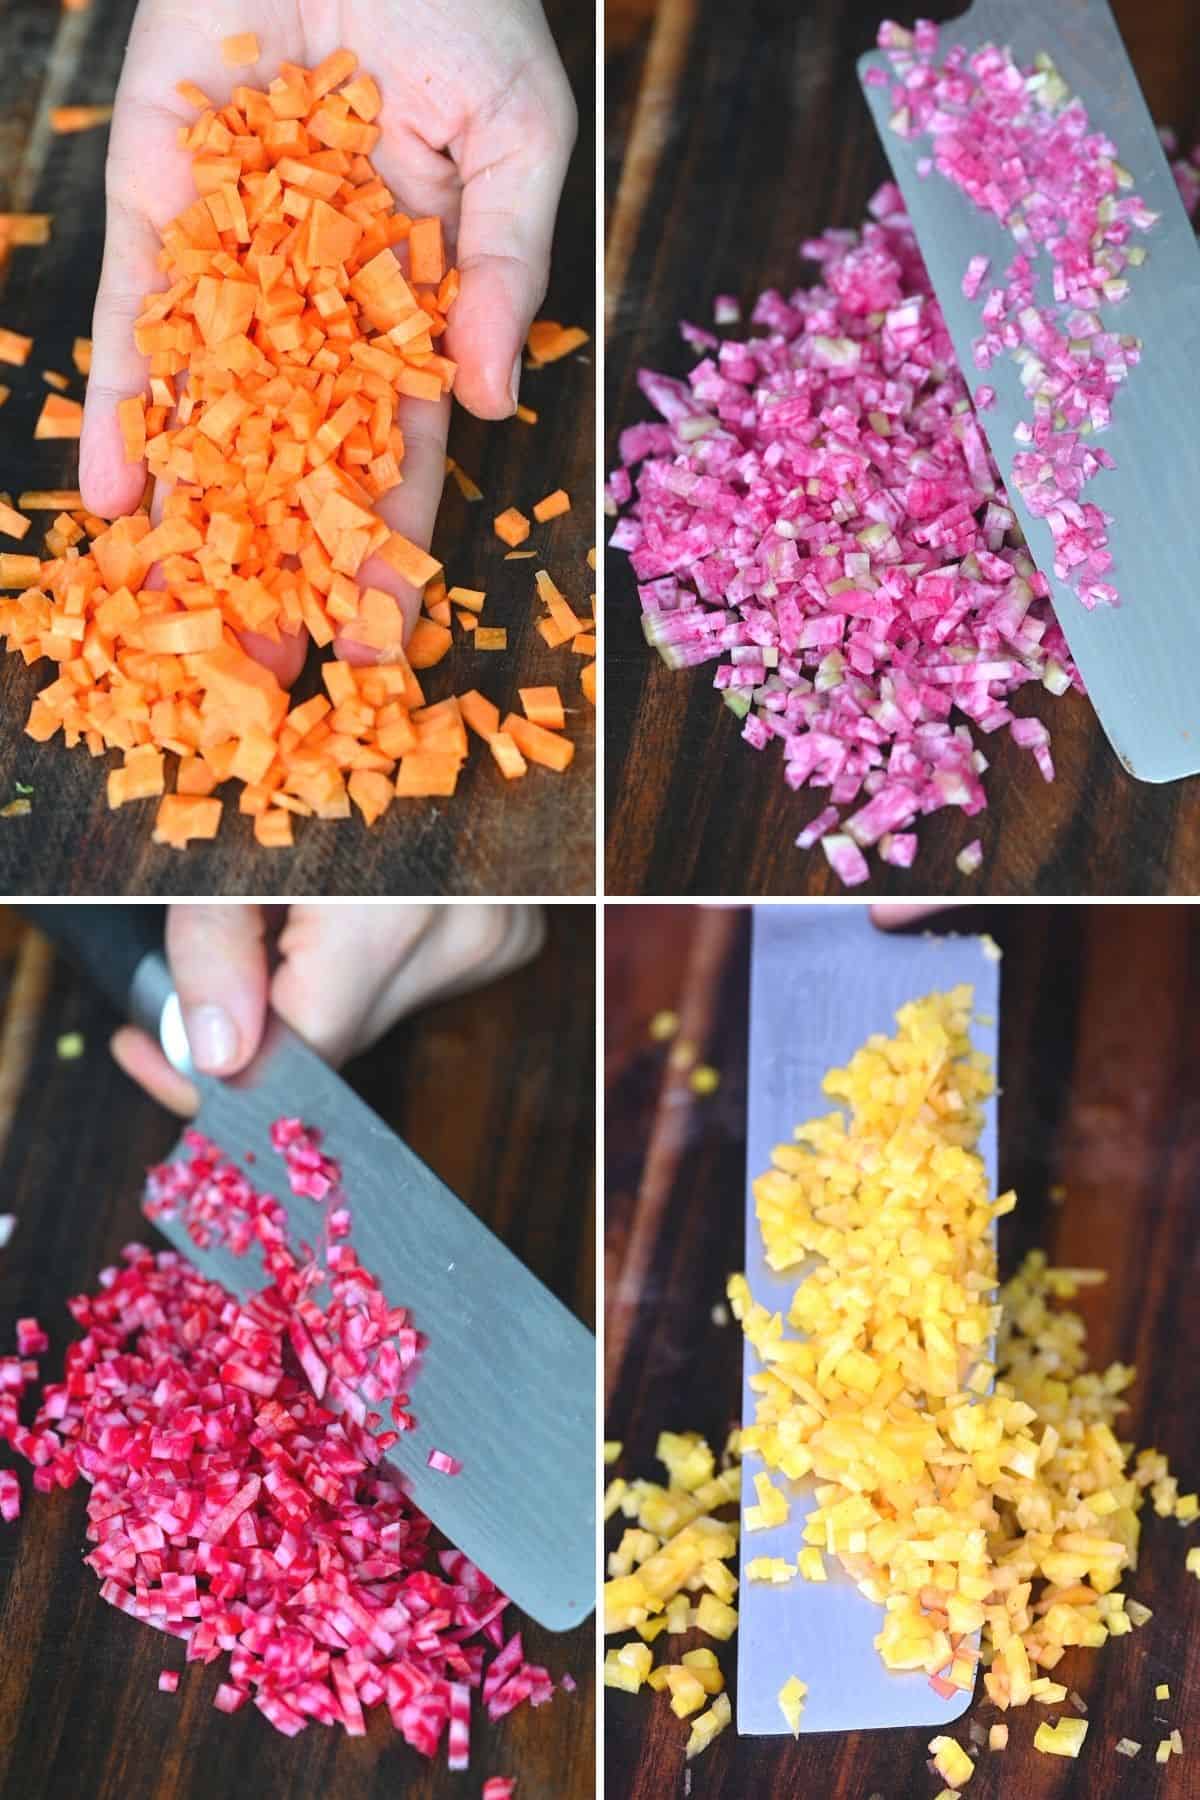 Steps for chopping root vegetables